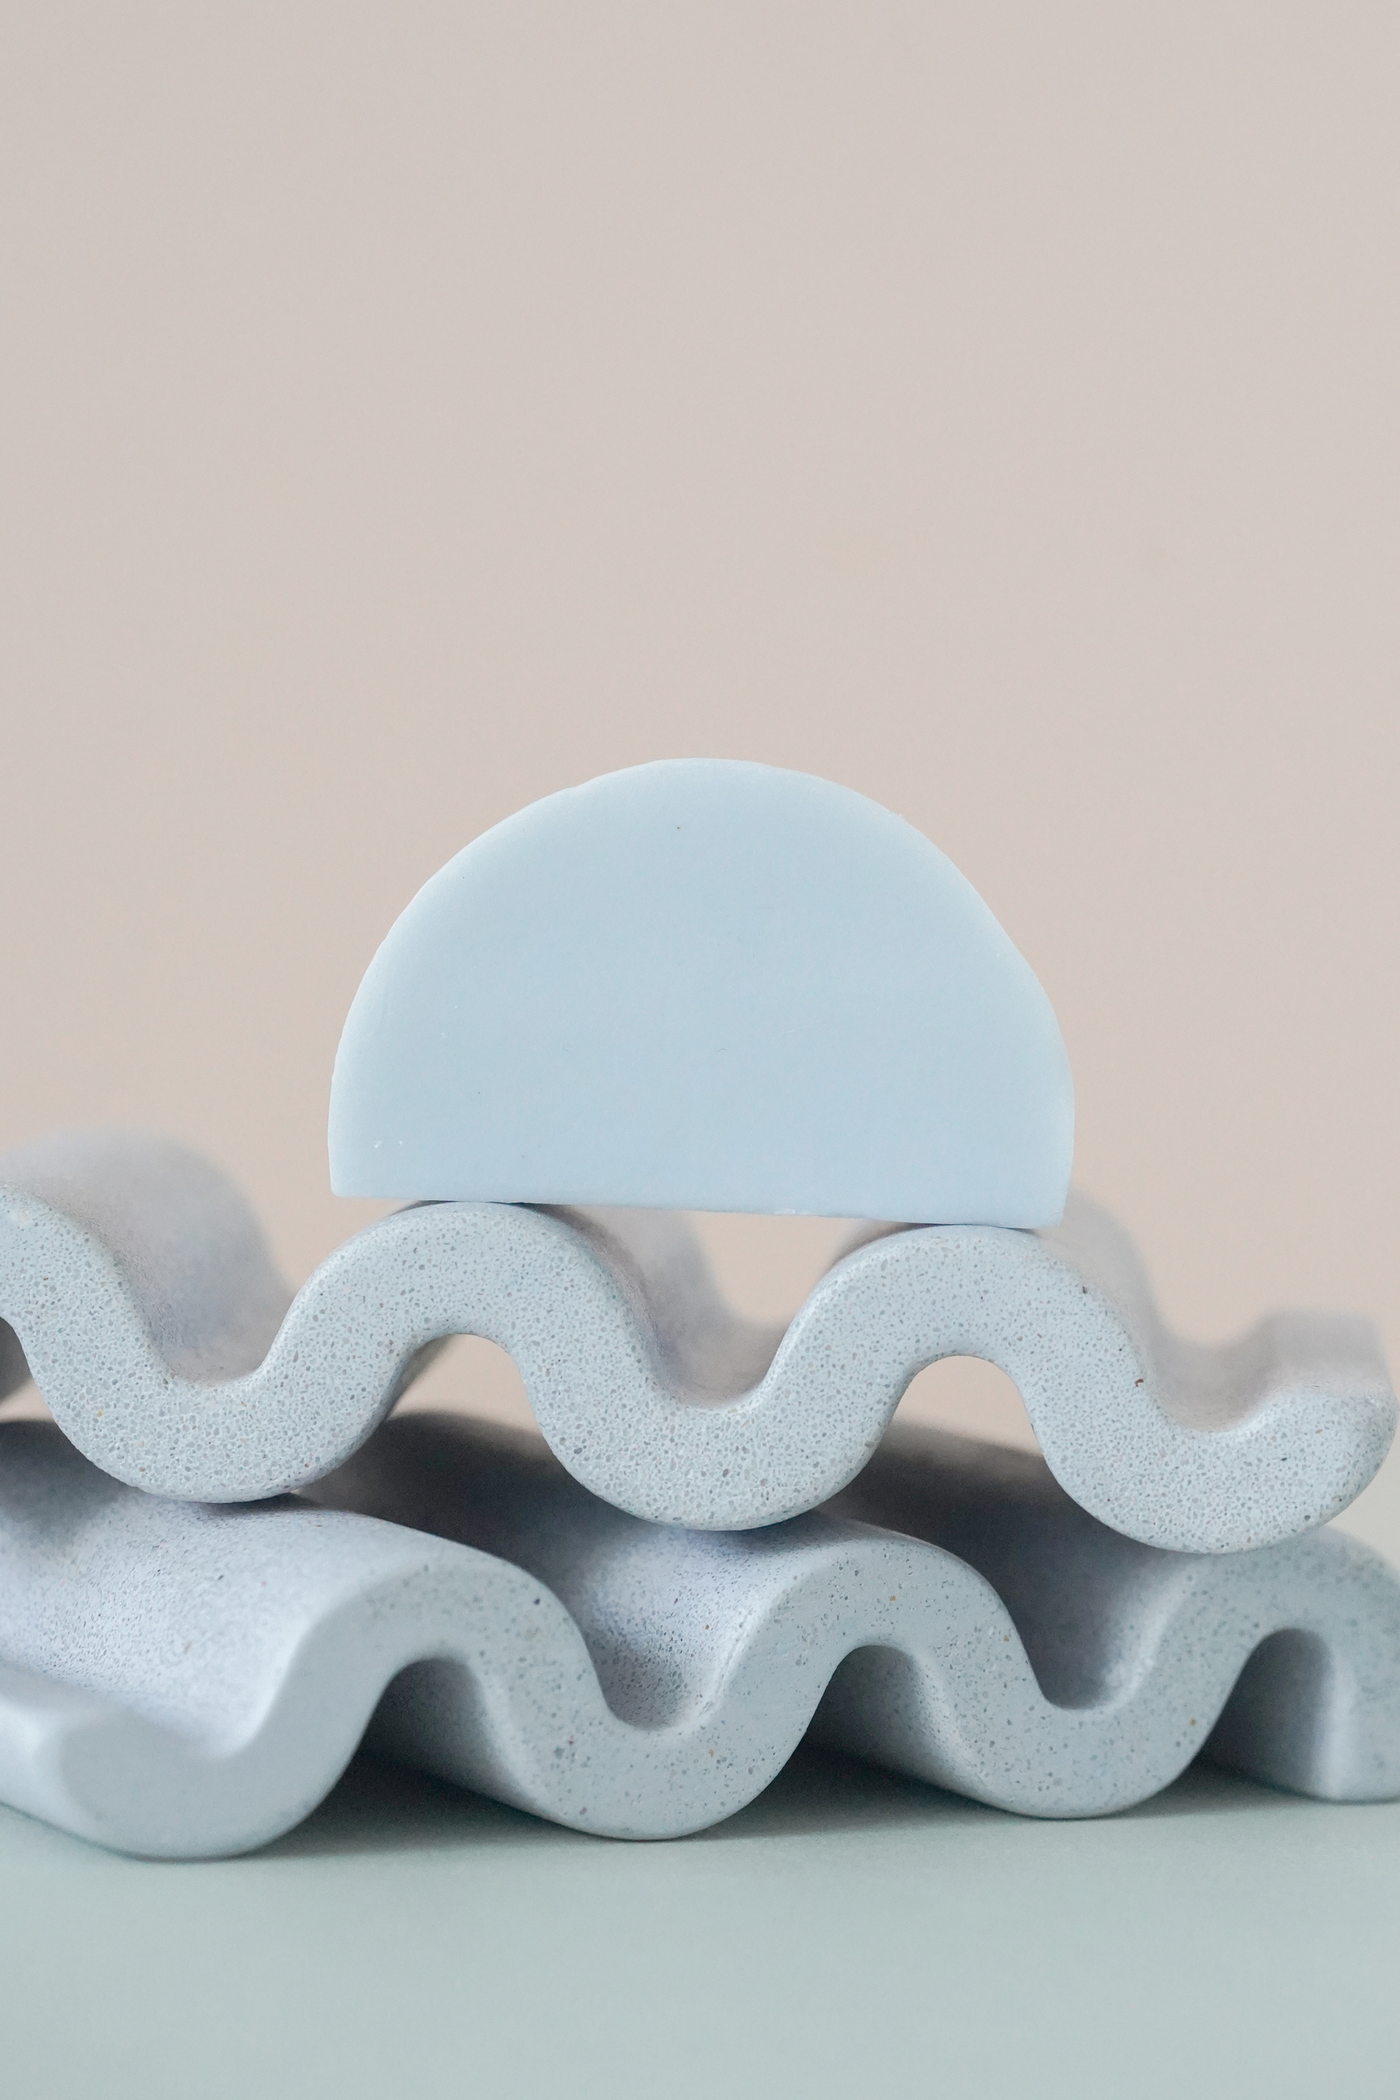 Gentle Mood Blue Wave Concrete Soap Dish, available on ZERRIN with free Singapore shipping